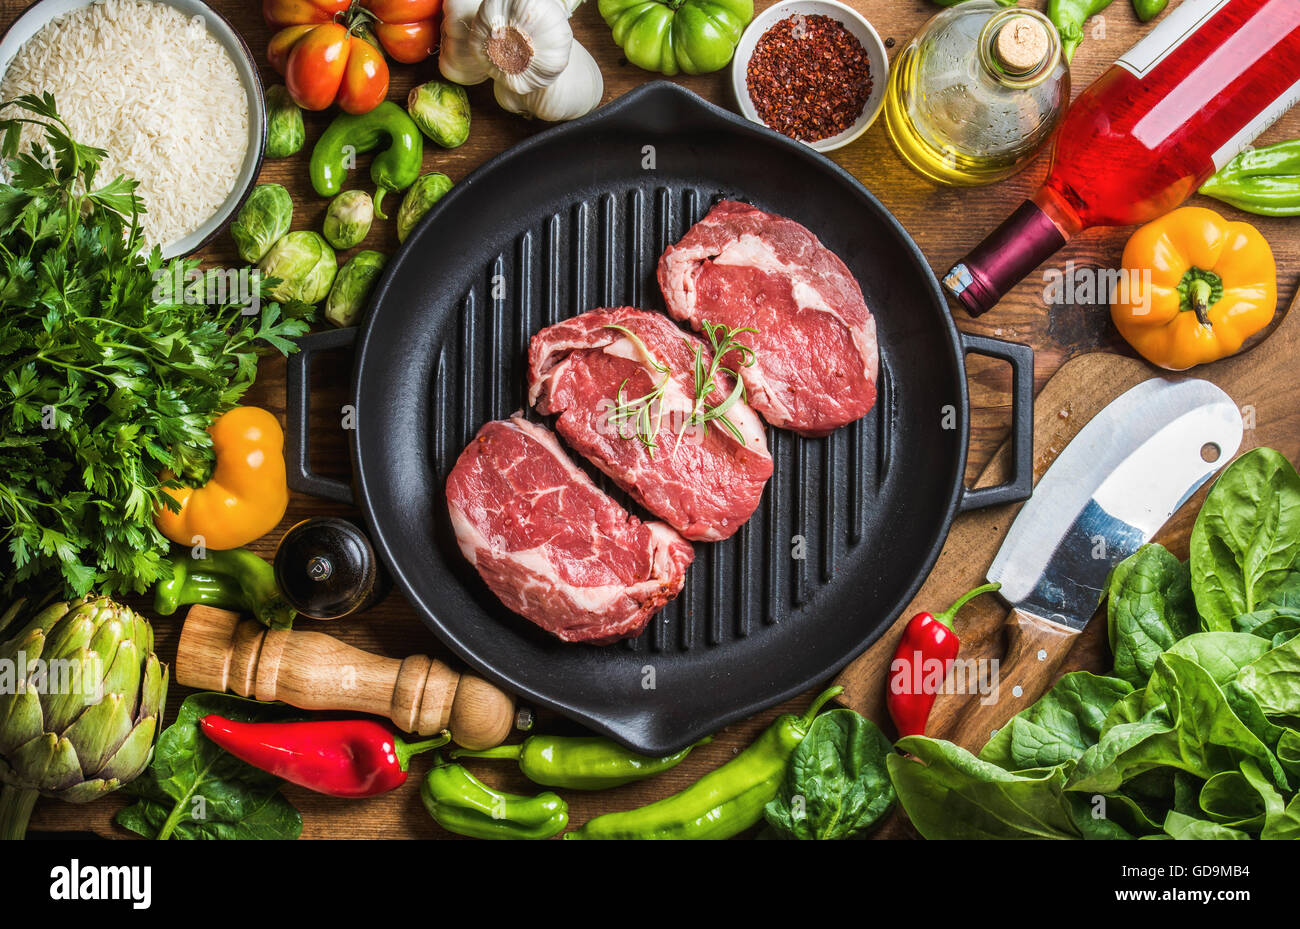 Ingredients for cooking healthy meat dinner. Raw uncooked beef steaks in cast iron grilling pan with vegetables, rice, spices, o Stock Photo